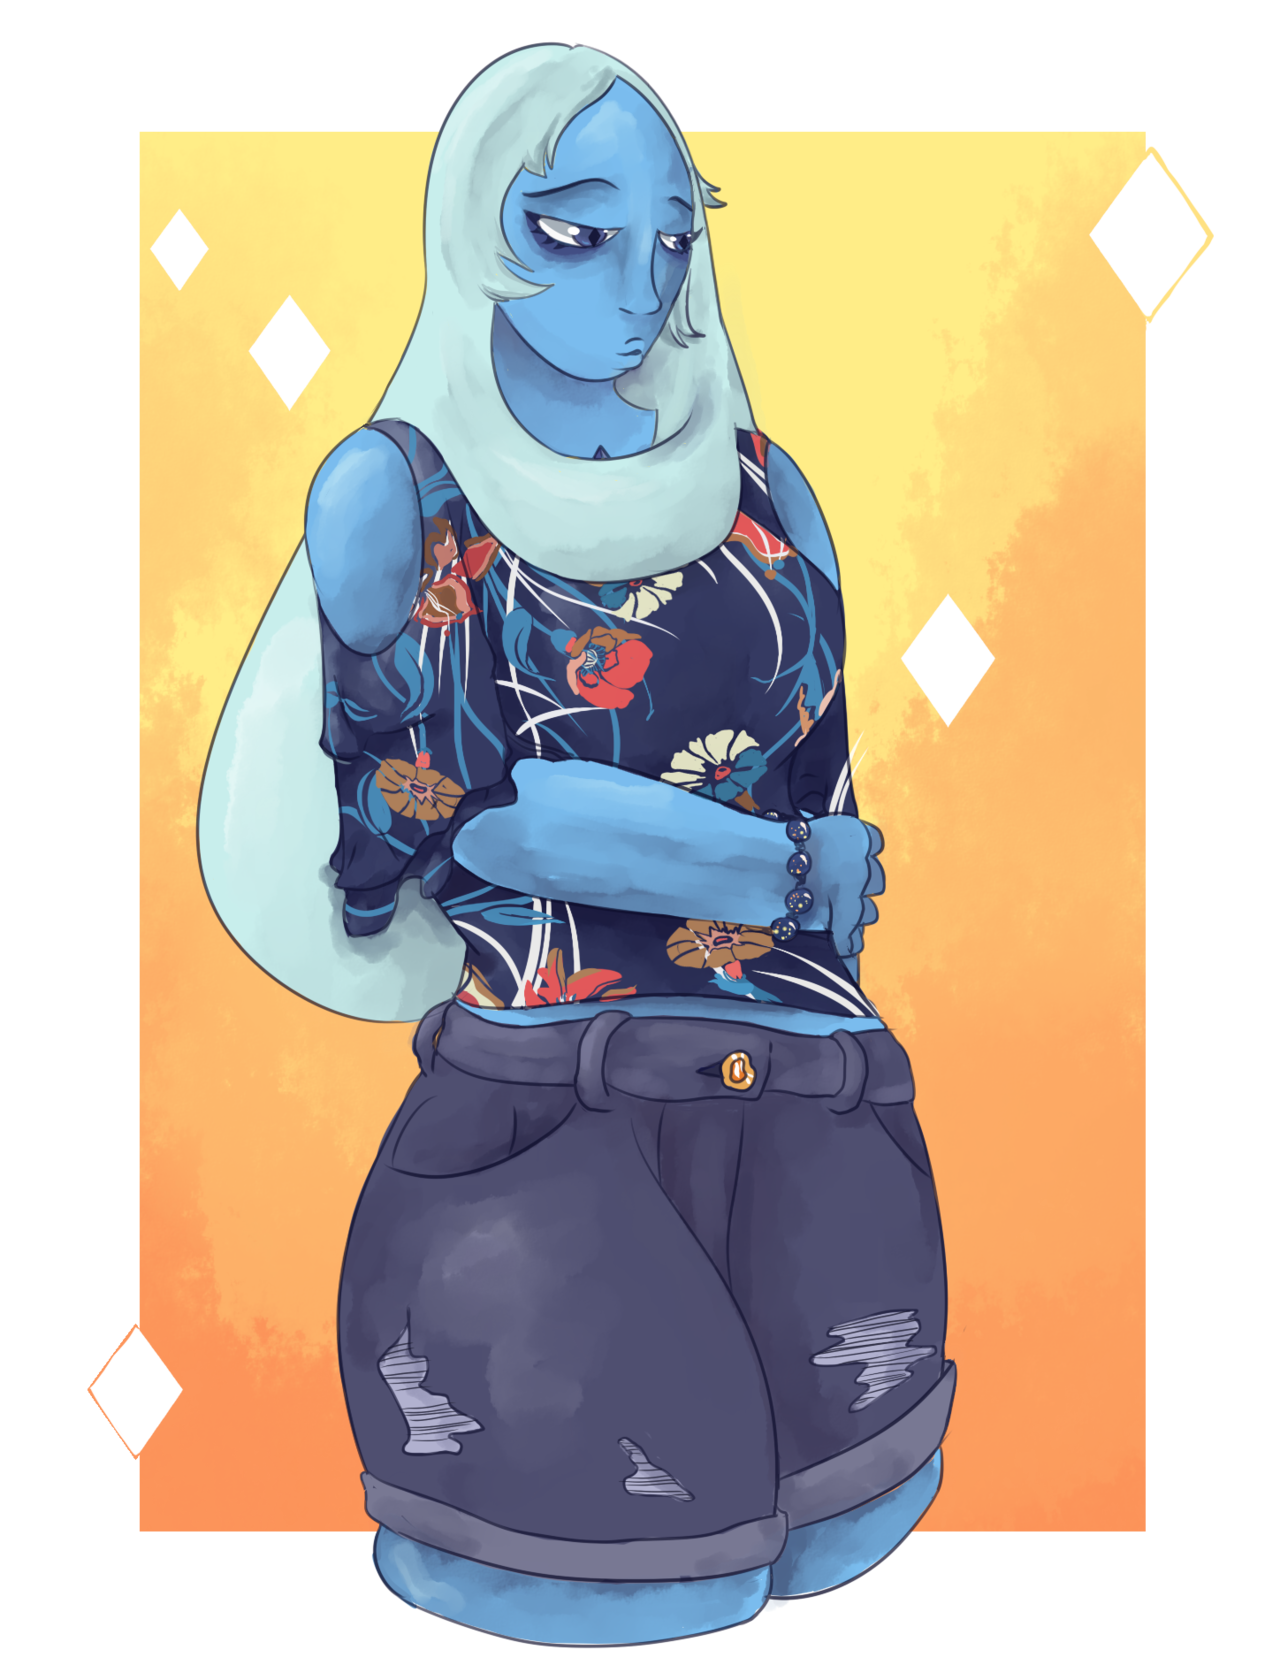 I got this shirt that reminded me of Blue Diamond, so naturally, this is what I had to draw.